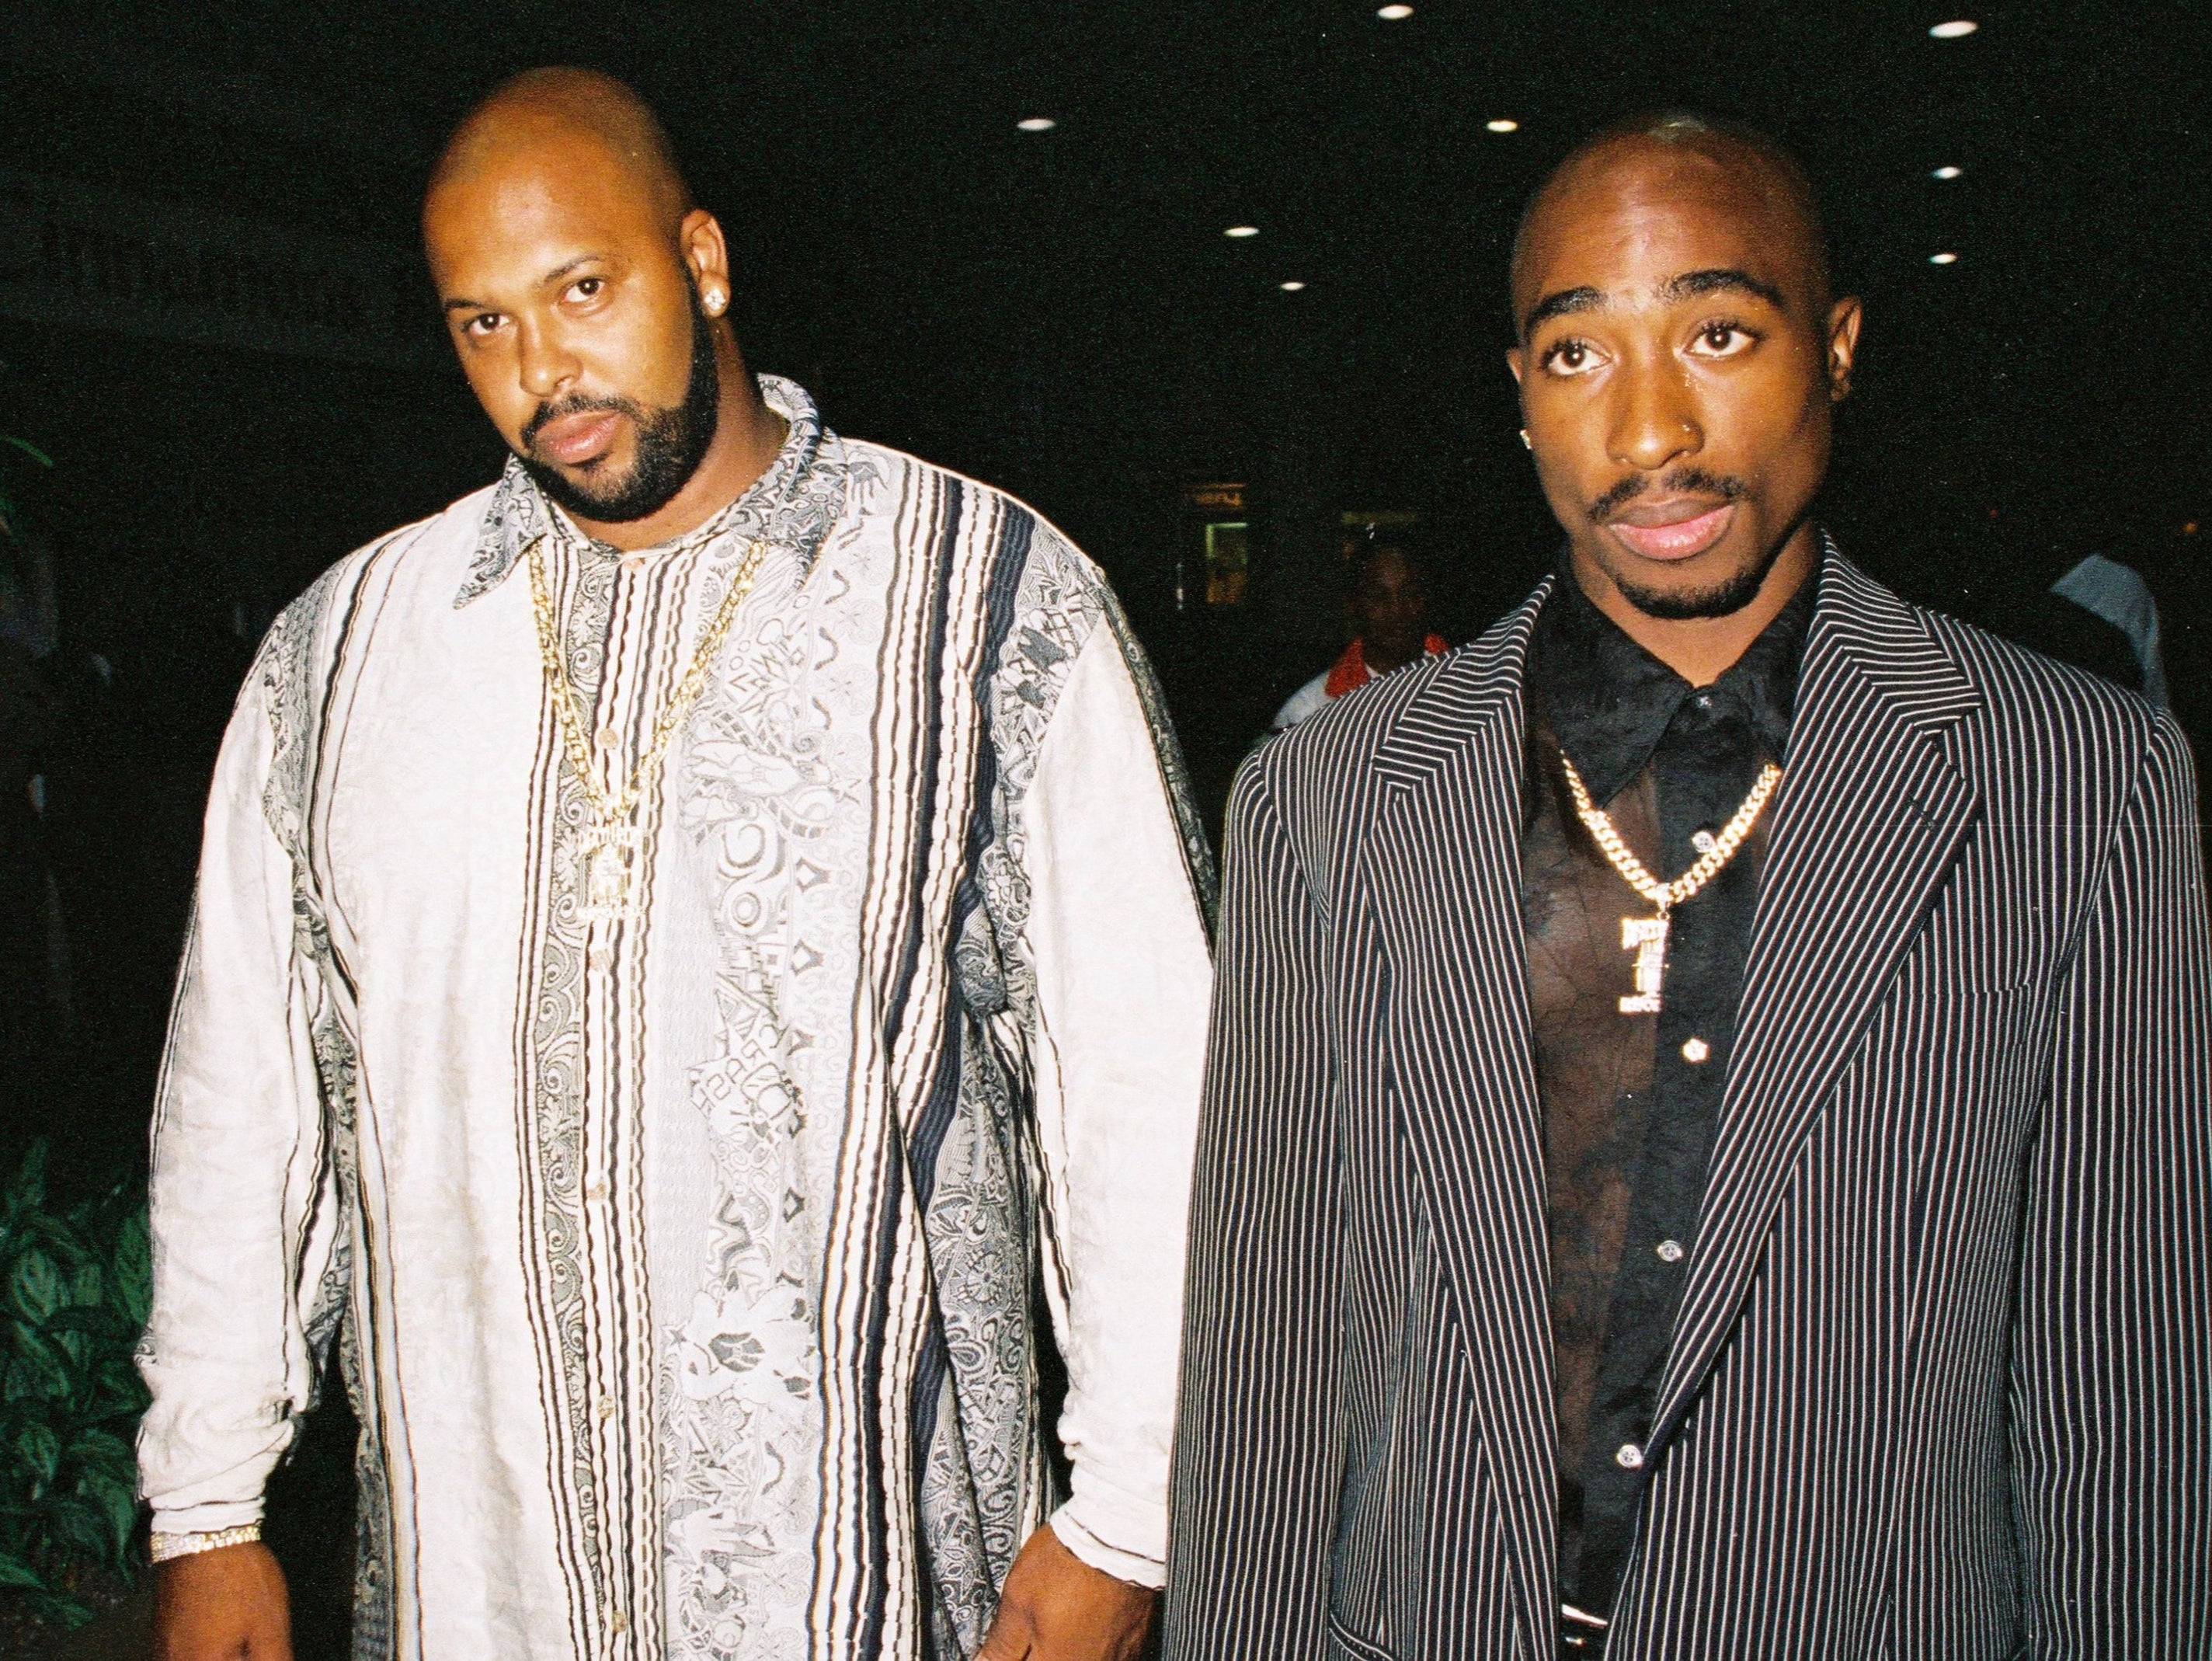 Suge Knight and 2Pac at the Sunset Park premiere, April 1996